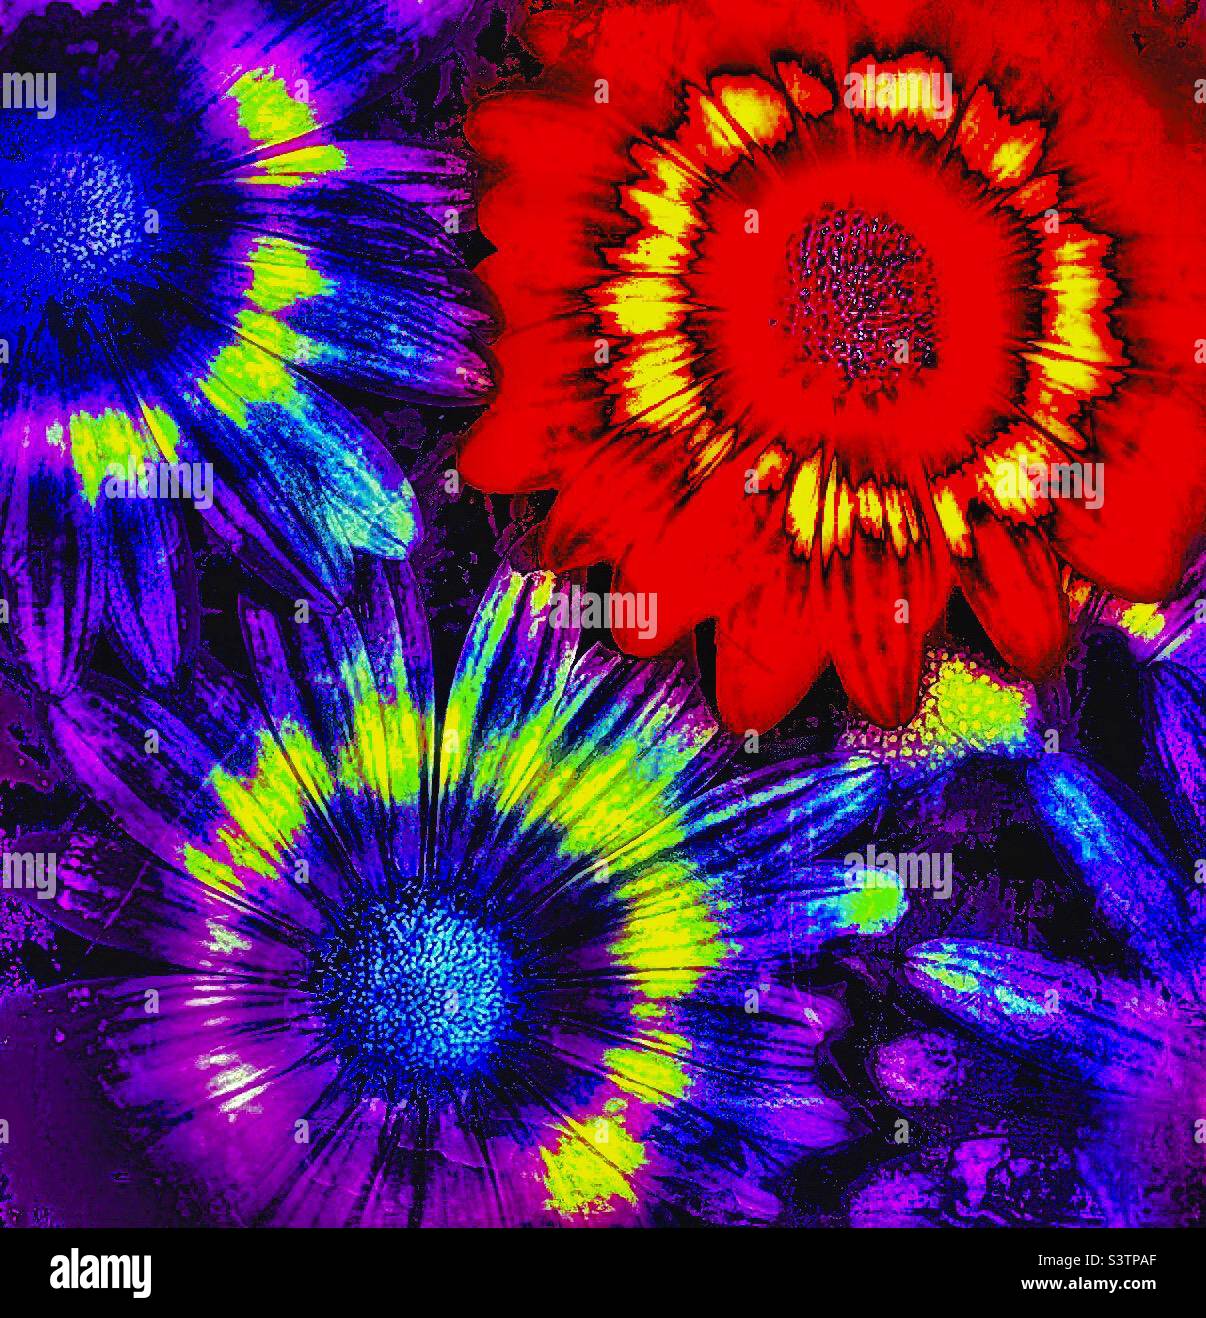 Pop Art daisies- made by taking orange daisies and thru various IOS apps altering color and texture. A fun, floral pop art piece. Stock Photo